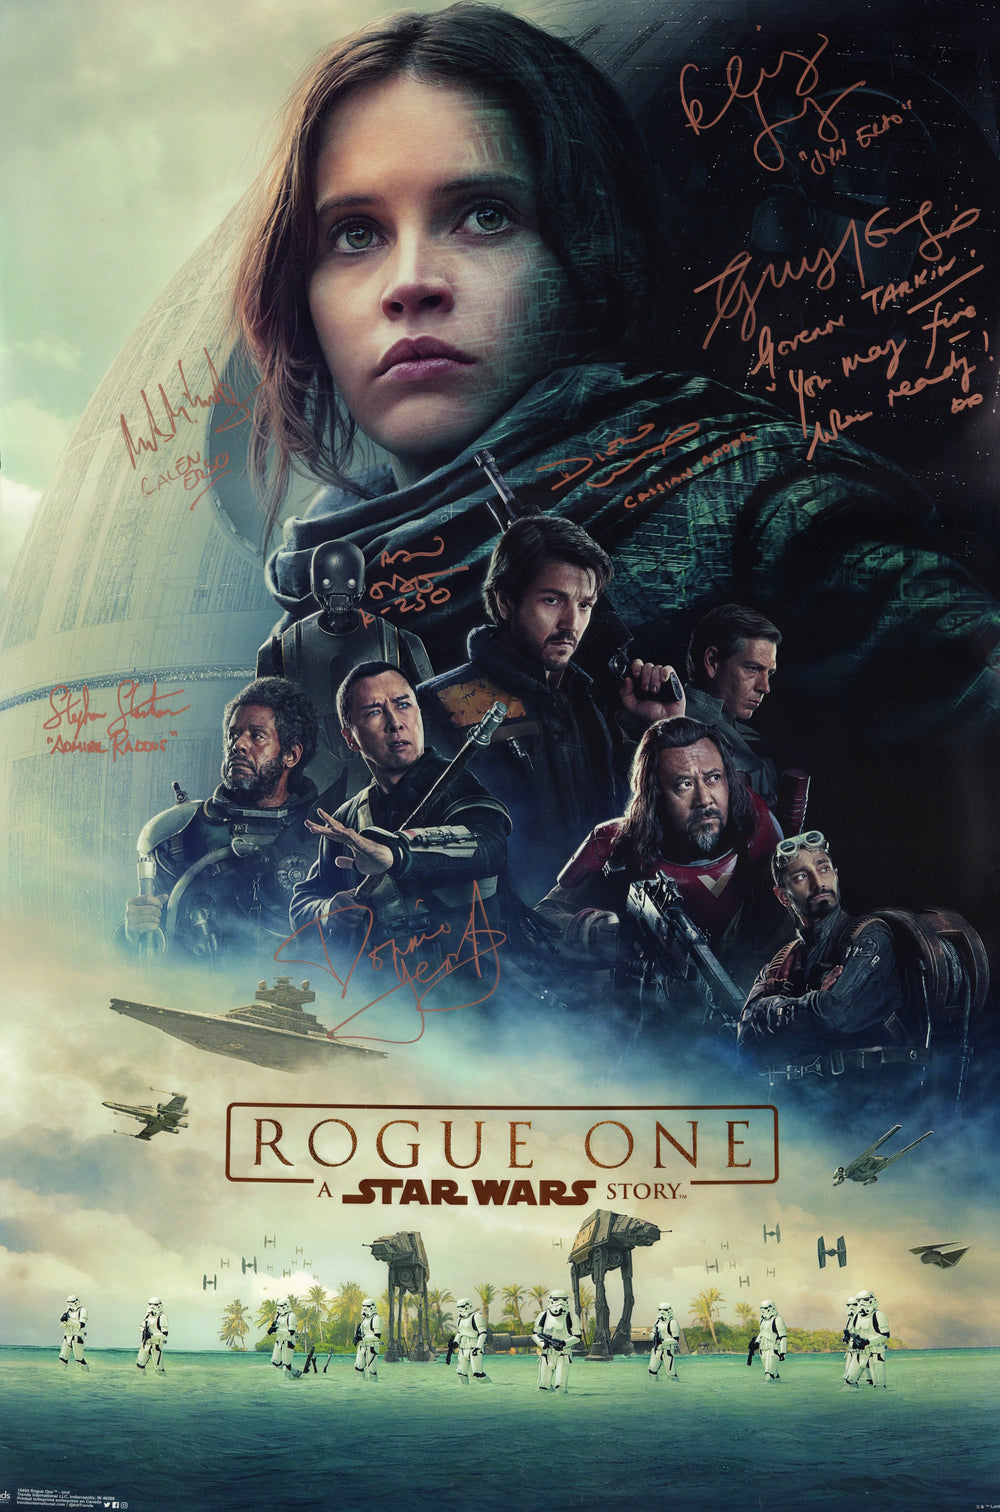 Rogue One: A Star Wars Story 22x34 Poster Signed by Felicity Jones, Diego Luna, Donnie Yen, Mads Mikkelsen, Alan Tudyk, Guy Henry, & Stephen Stanton with Character Names